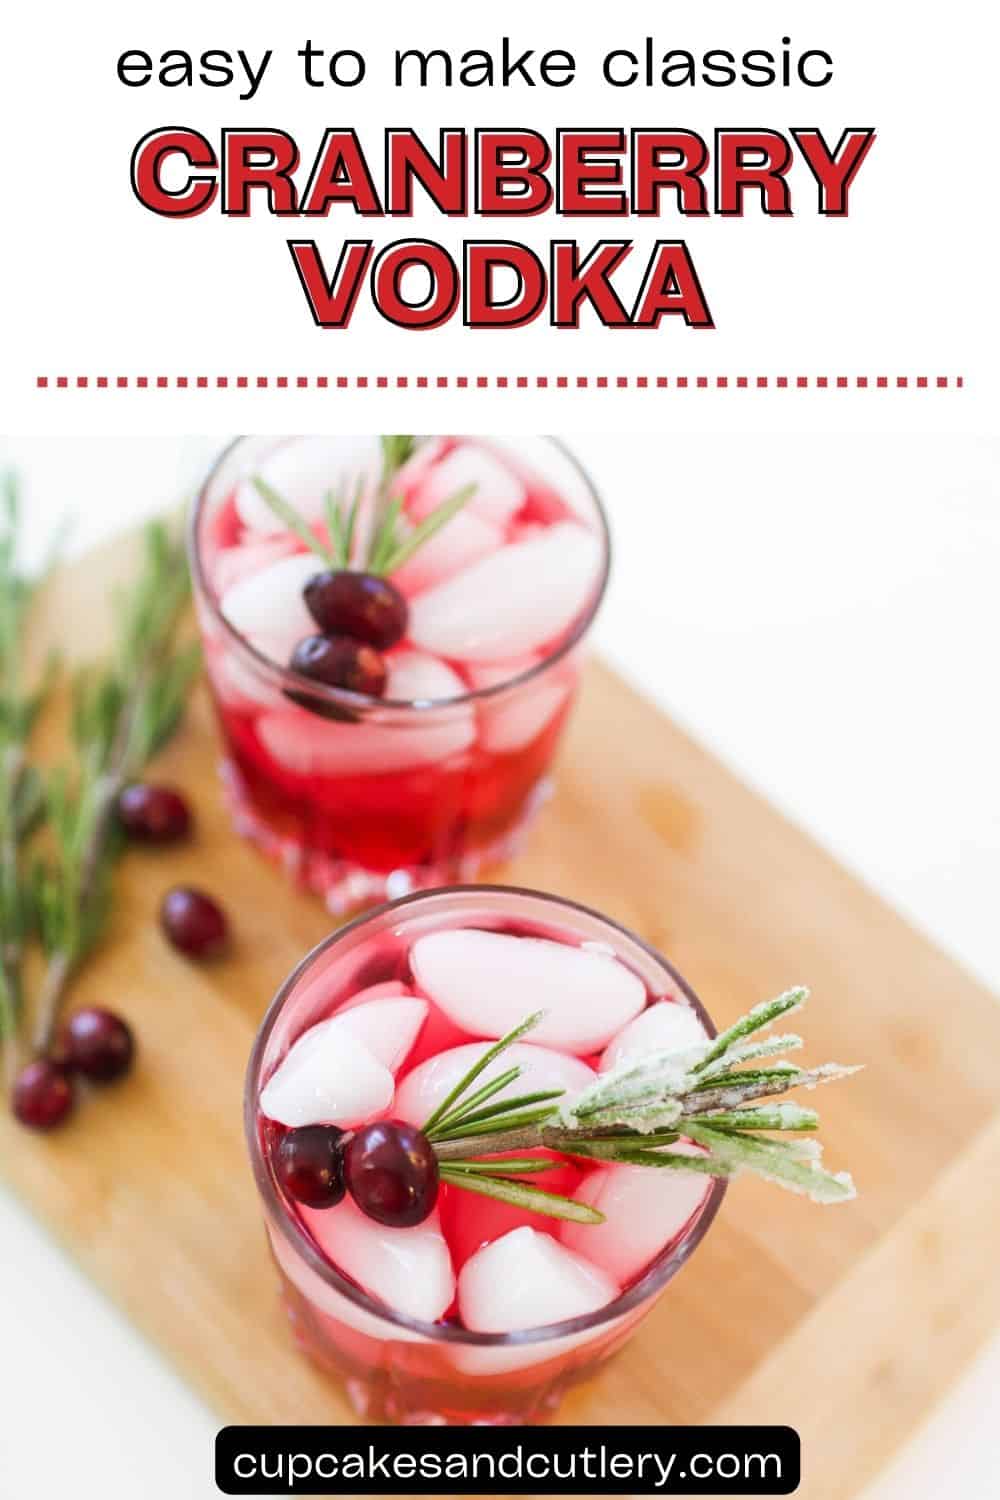 Text: easy to make cranberry vodka With two cocktail glasses on a table topped with sugared rosemary with fresh cranberries stuck on.